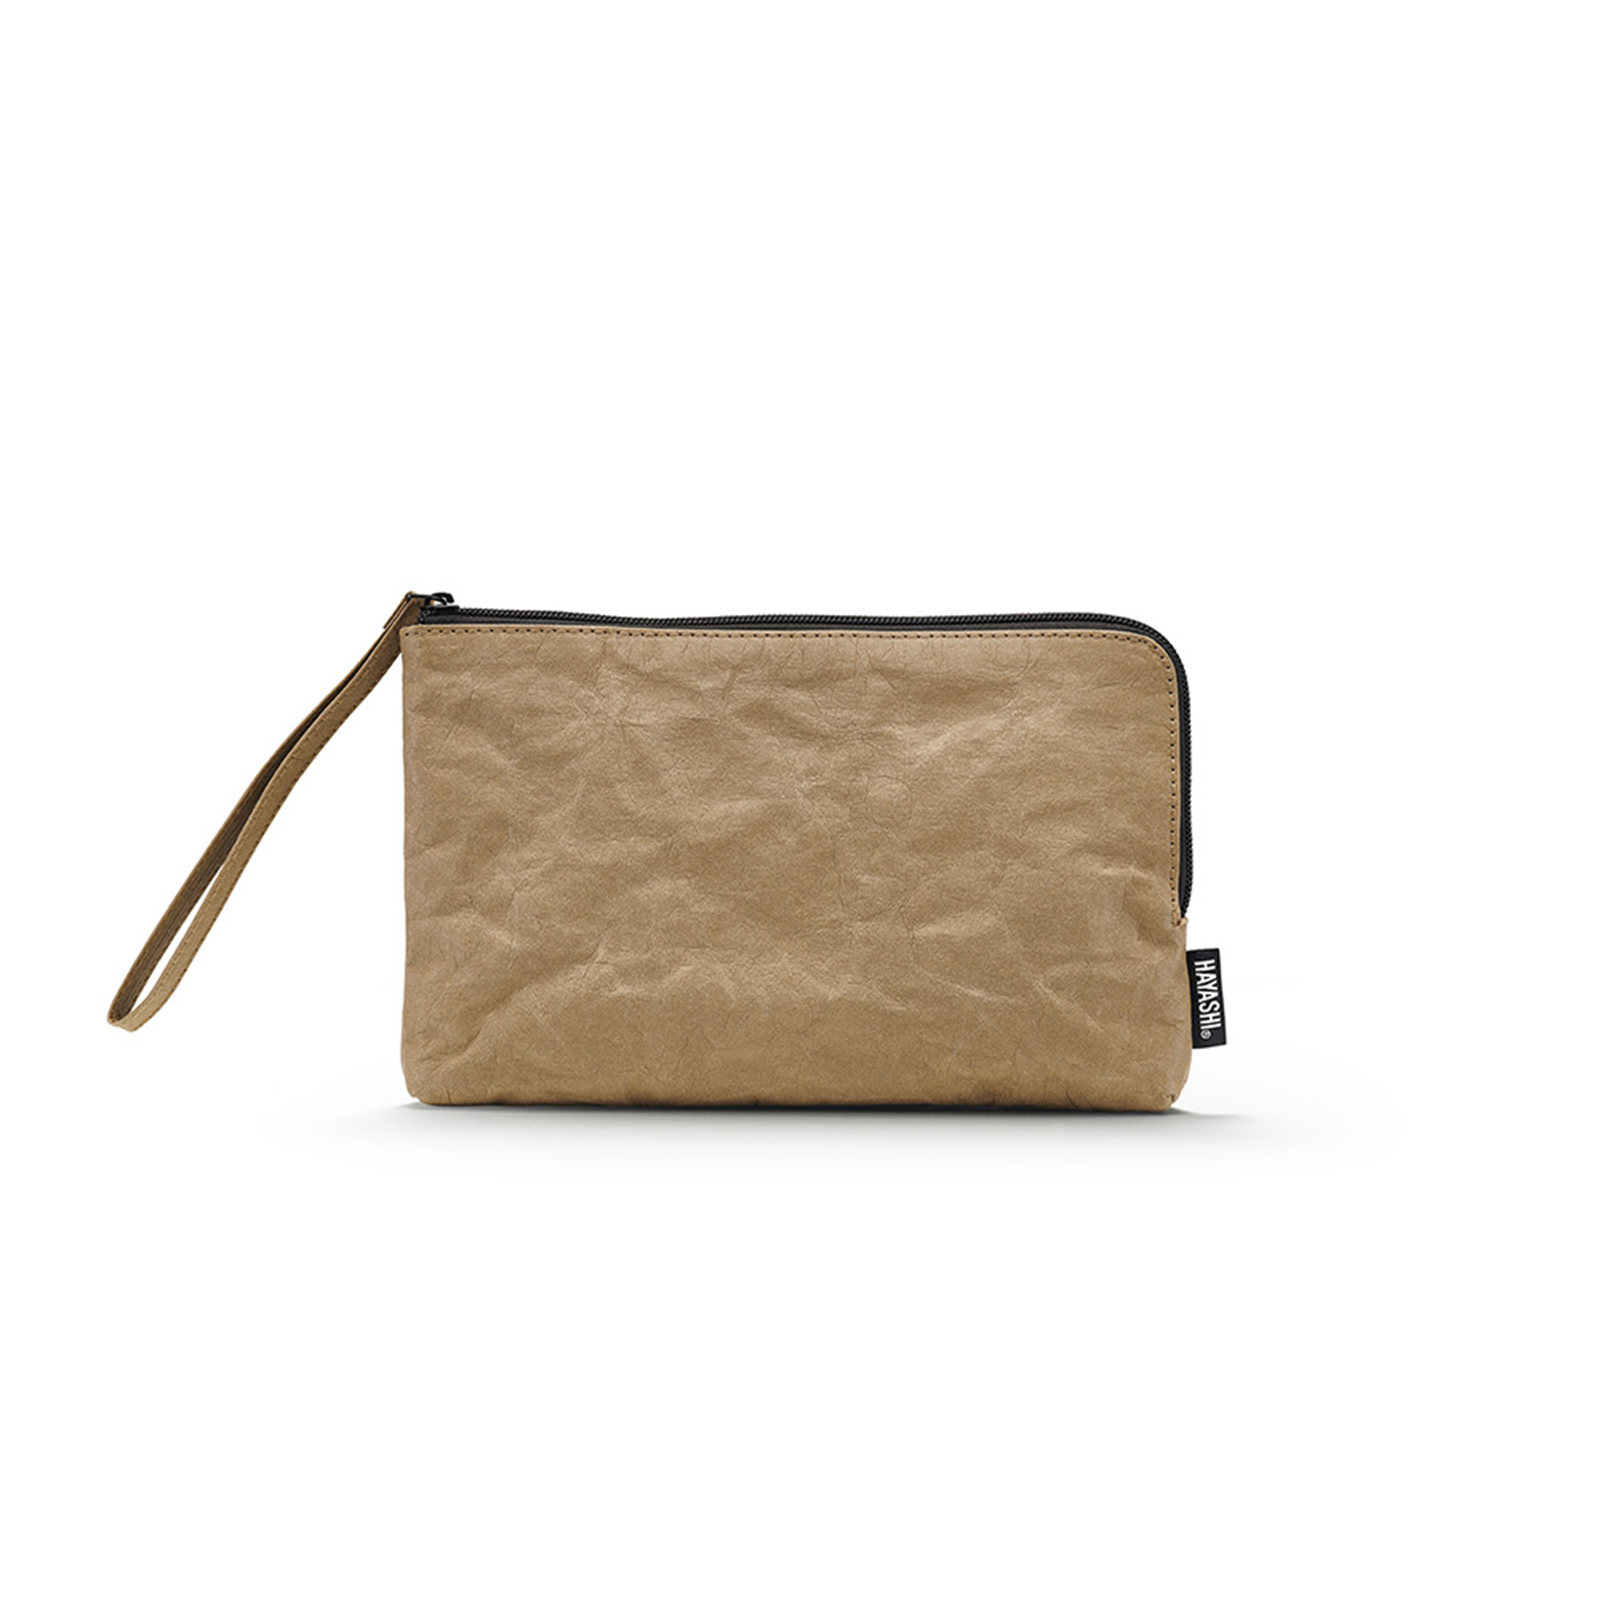 Hayashi Vegan Paper Leather Tidy Pouch in Tan Colour